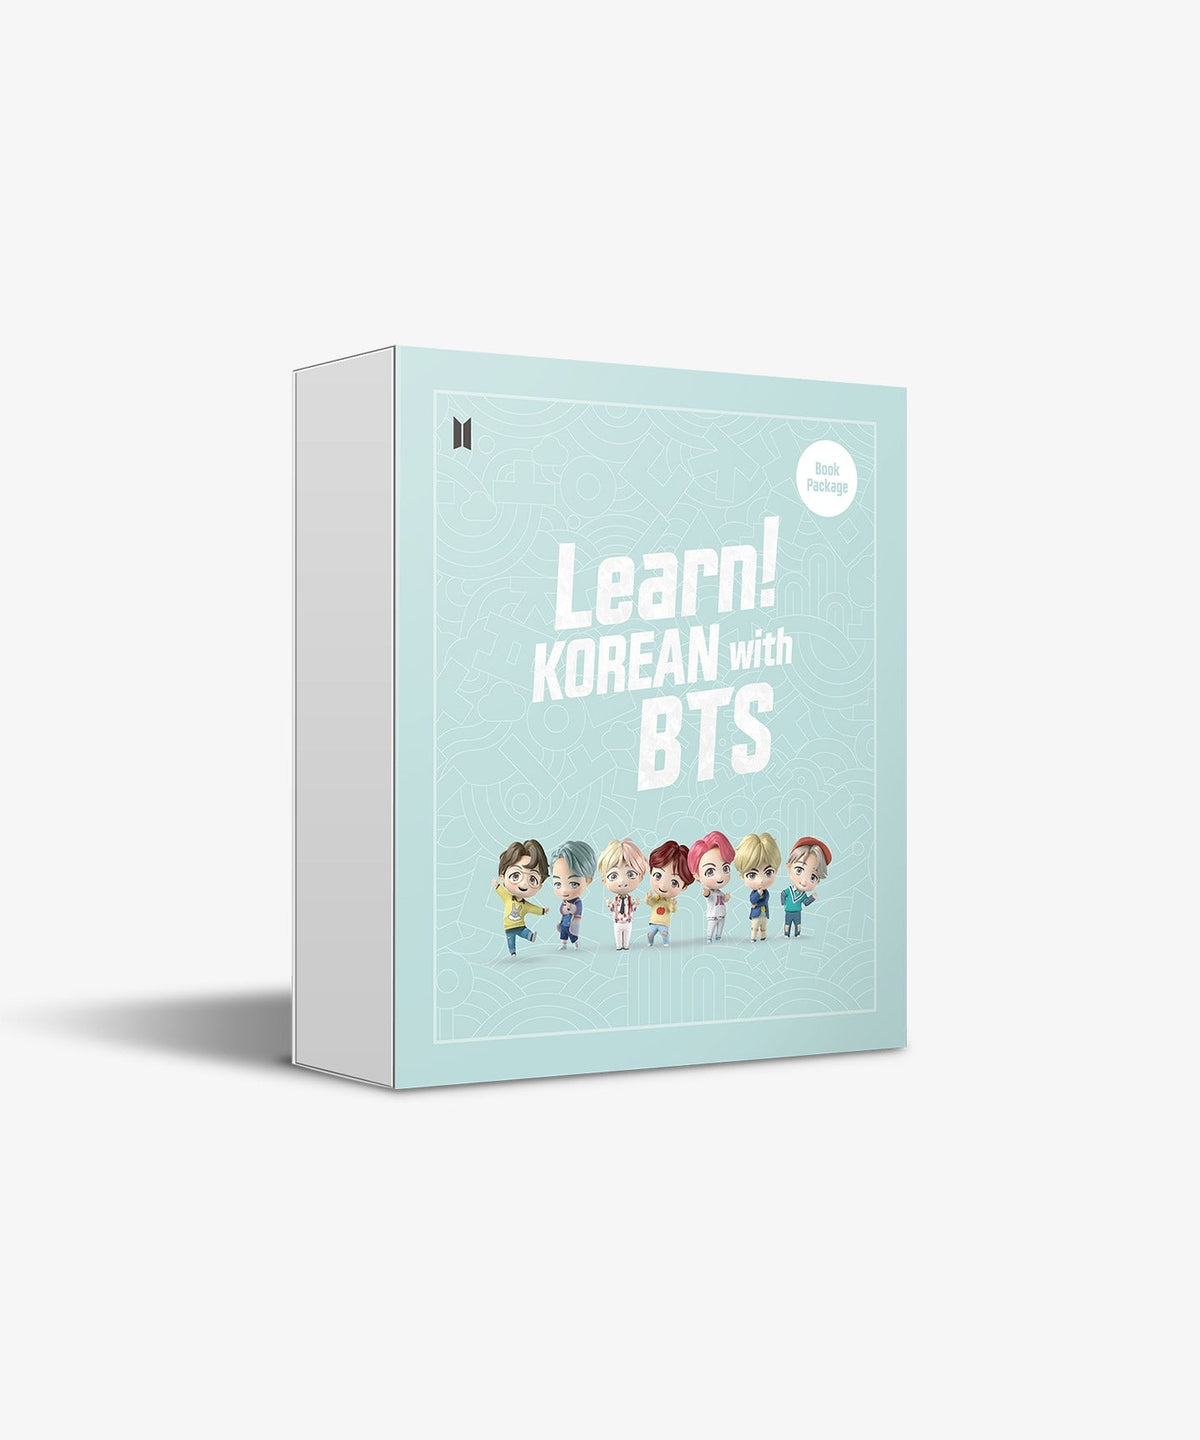 Learn! KOREAN with BTS Book ONLY Package